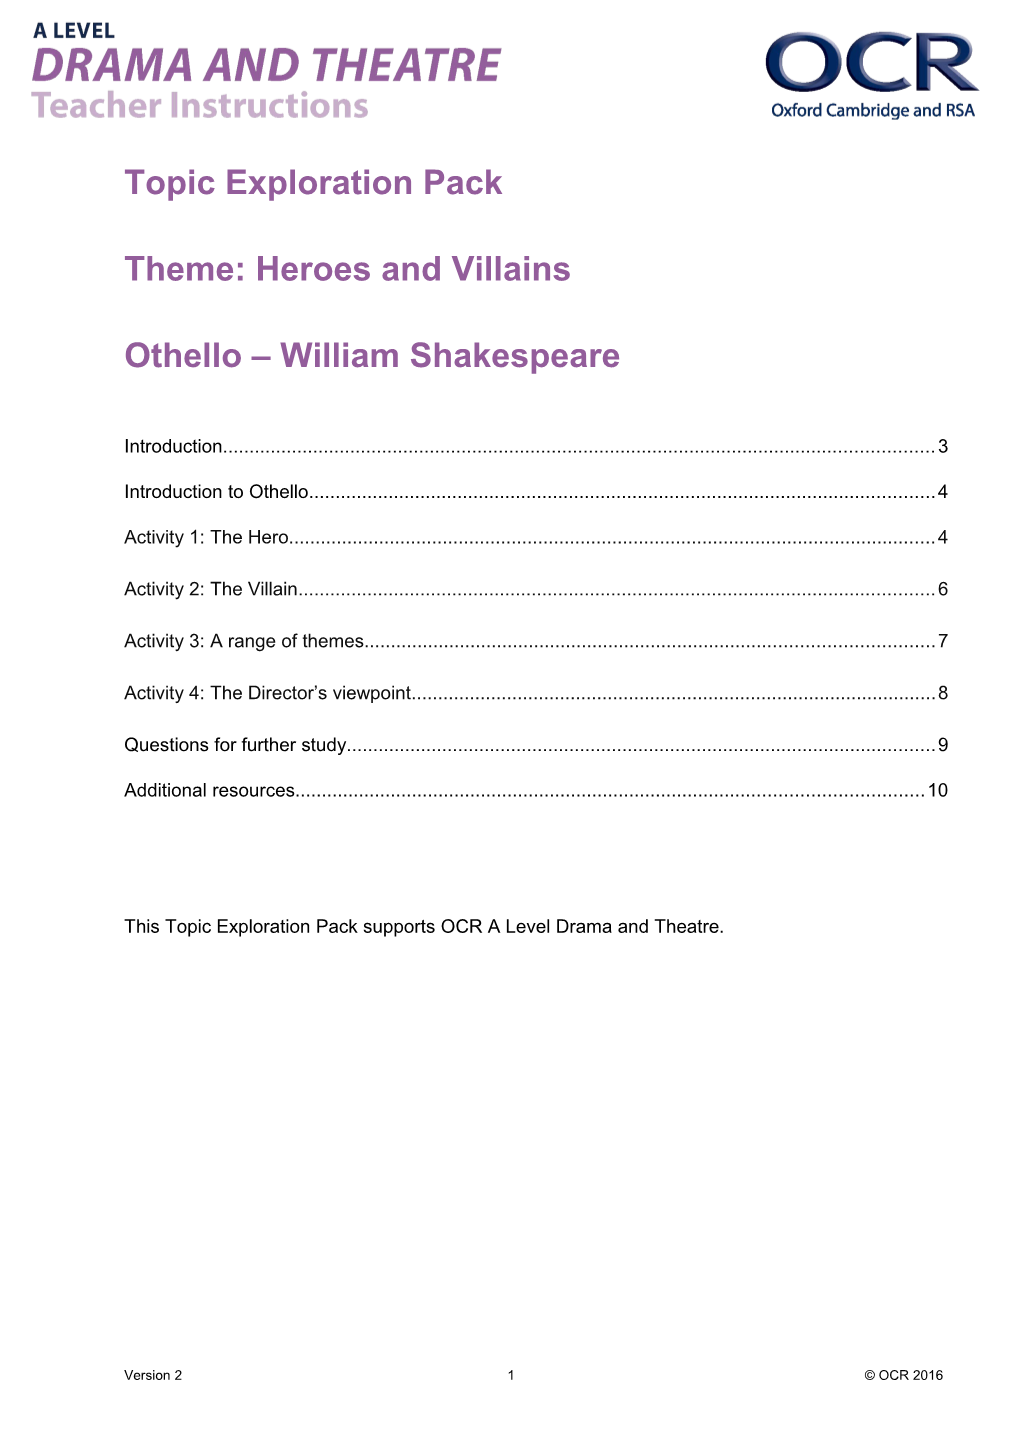 A Level Drama and Theatre Topic Exploration Pack (Othello)